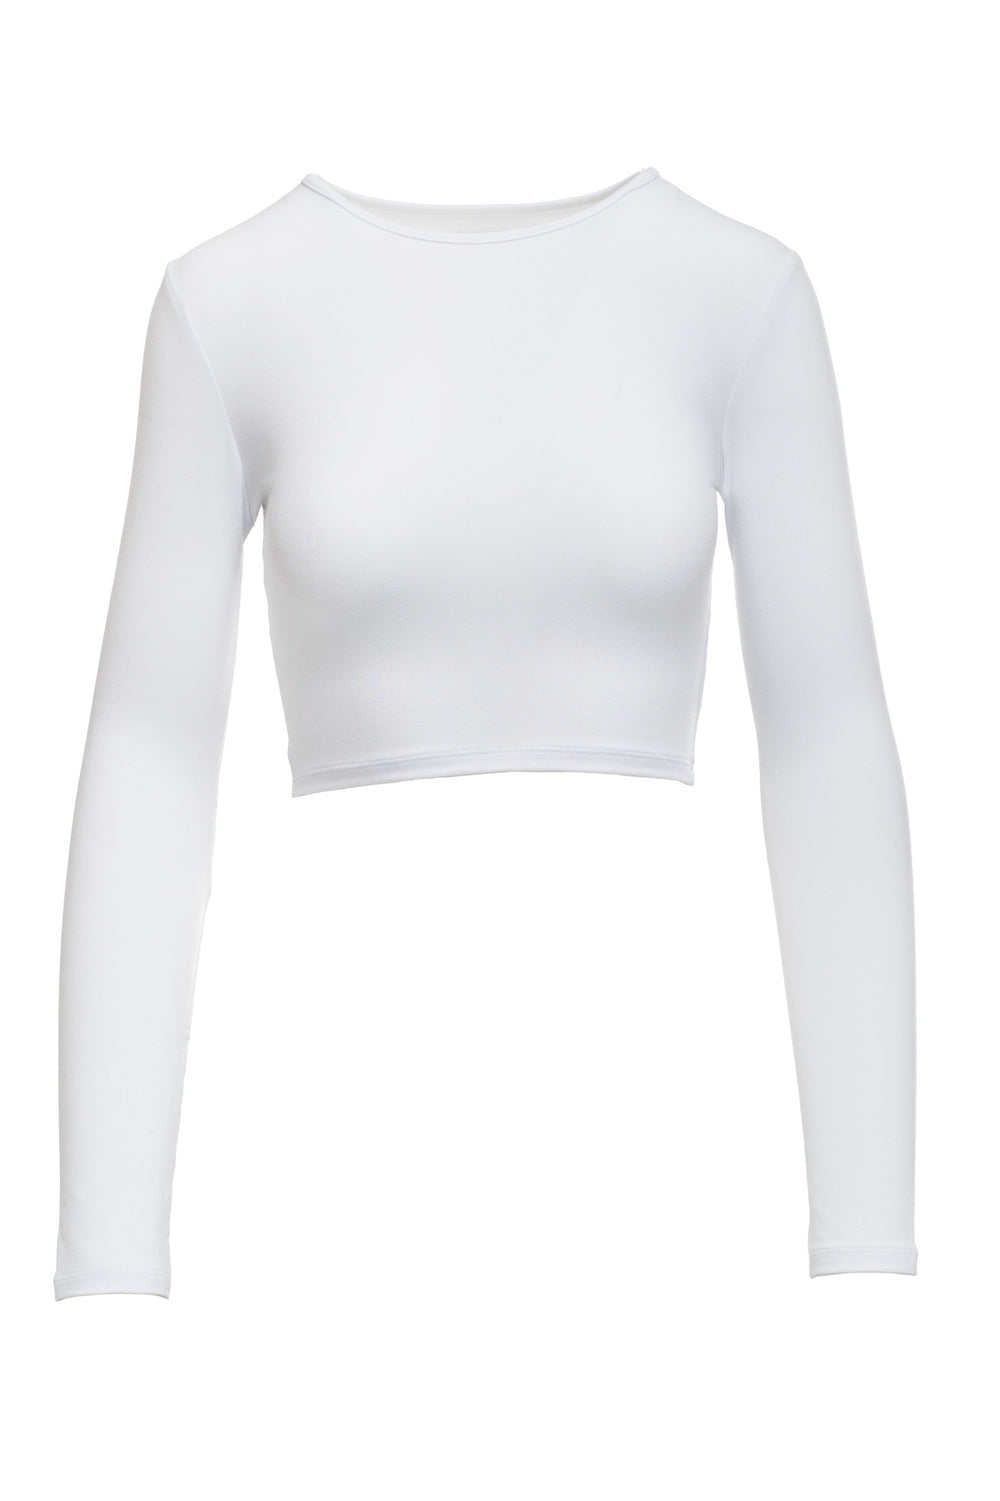 White long sleeve fitted crop top